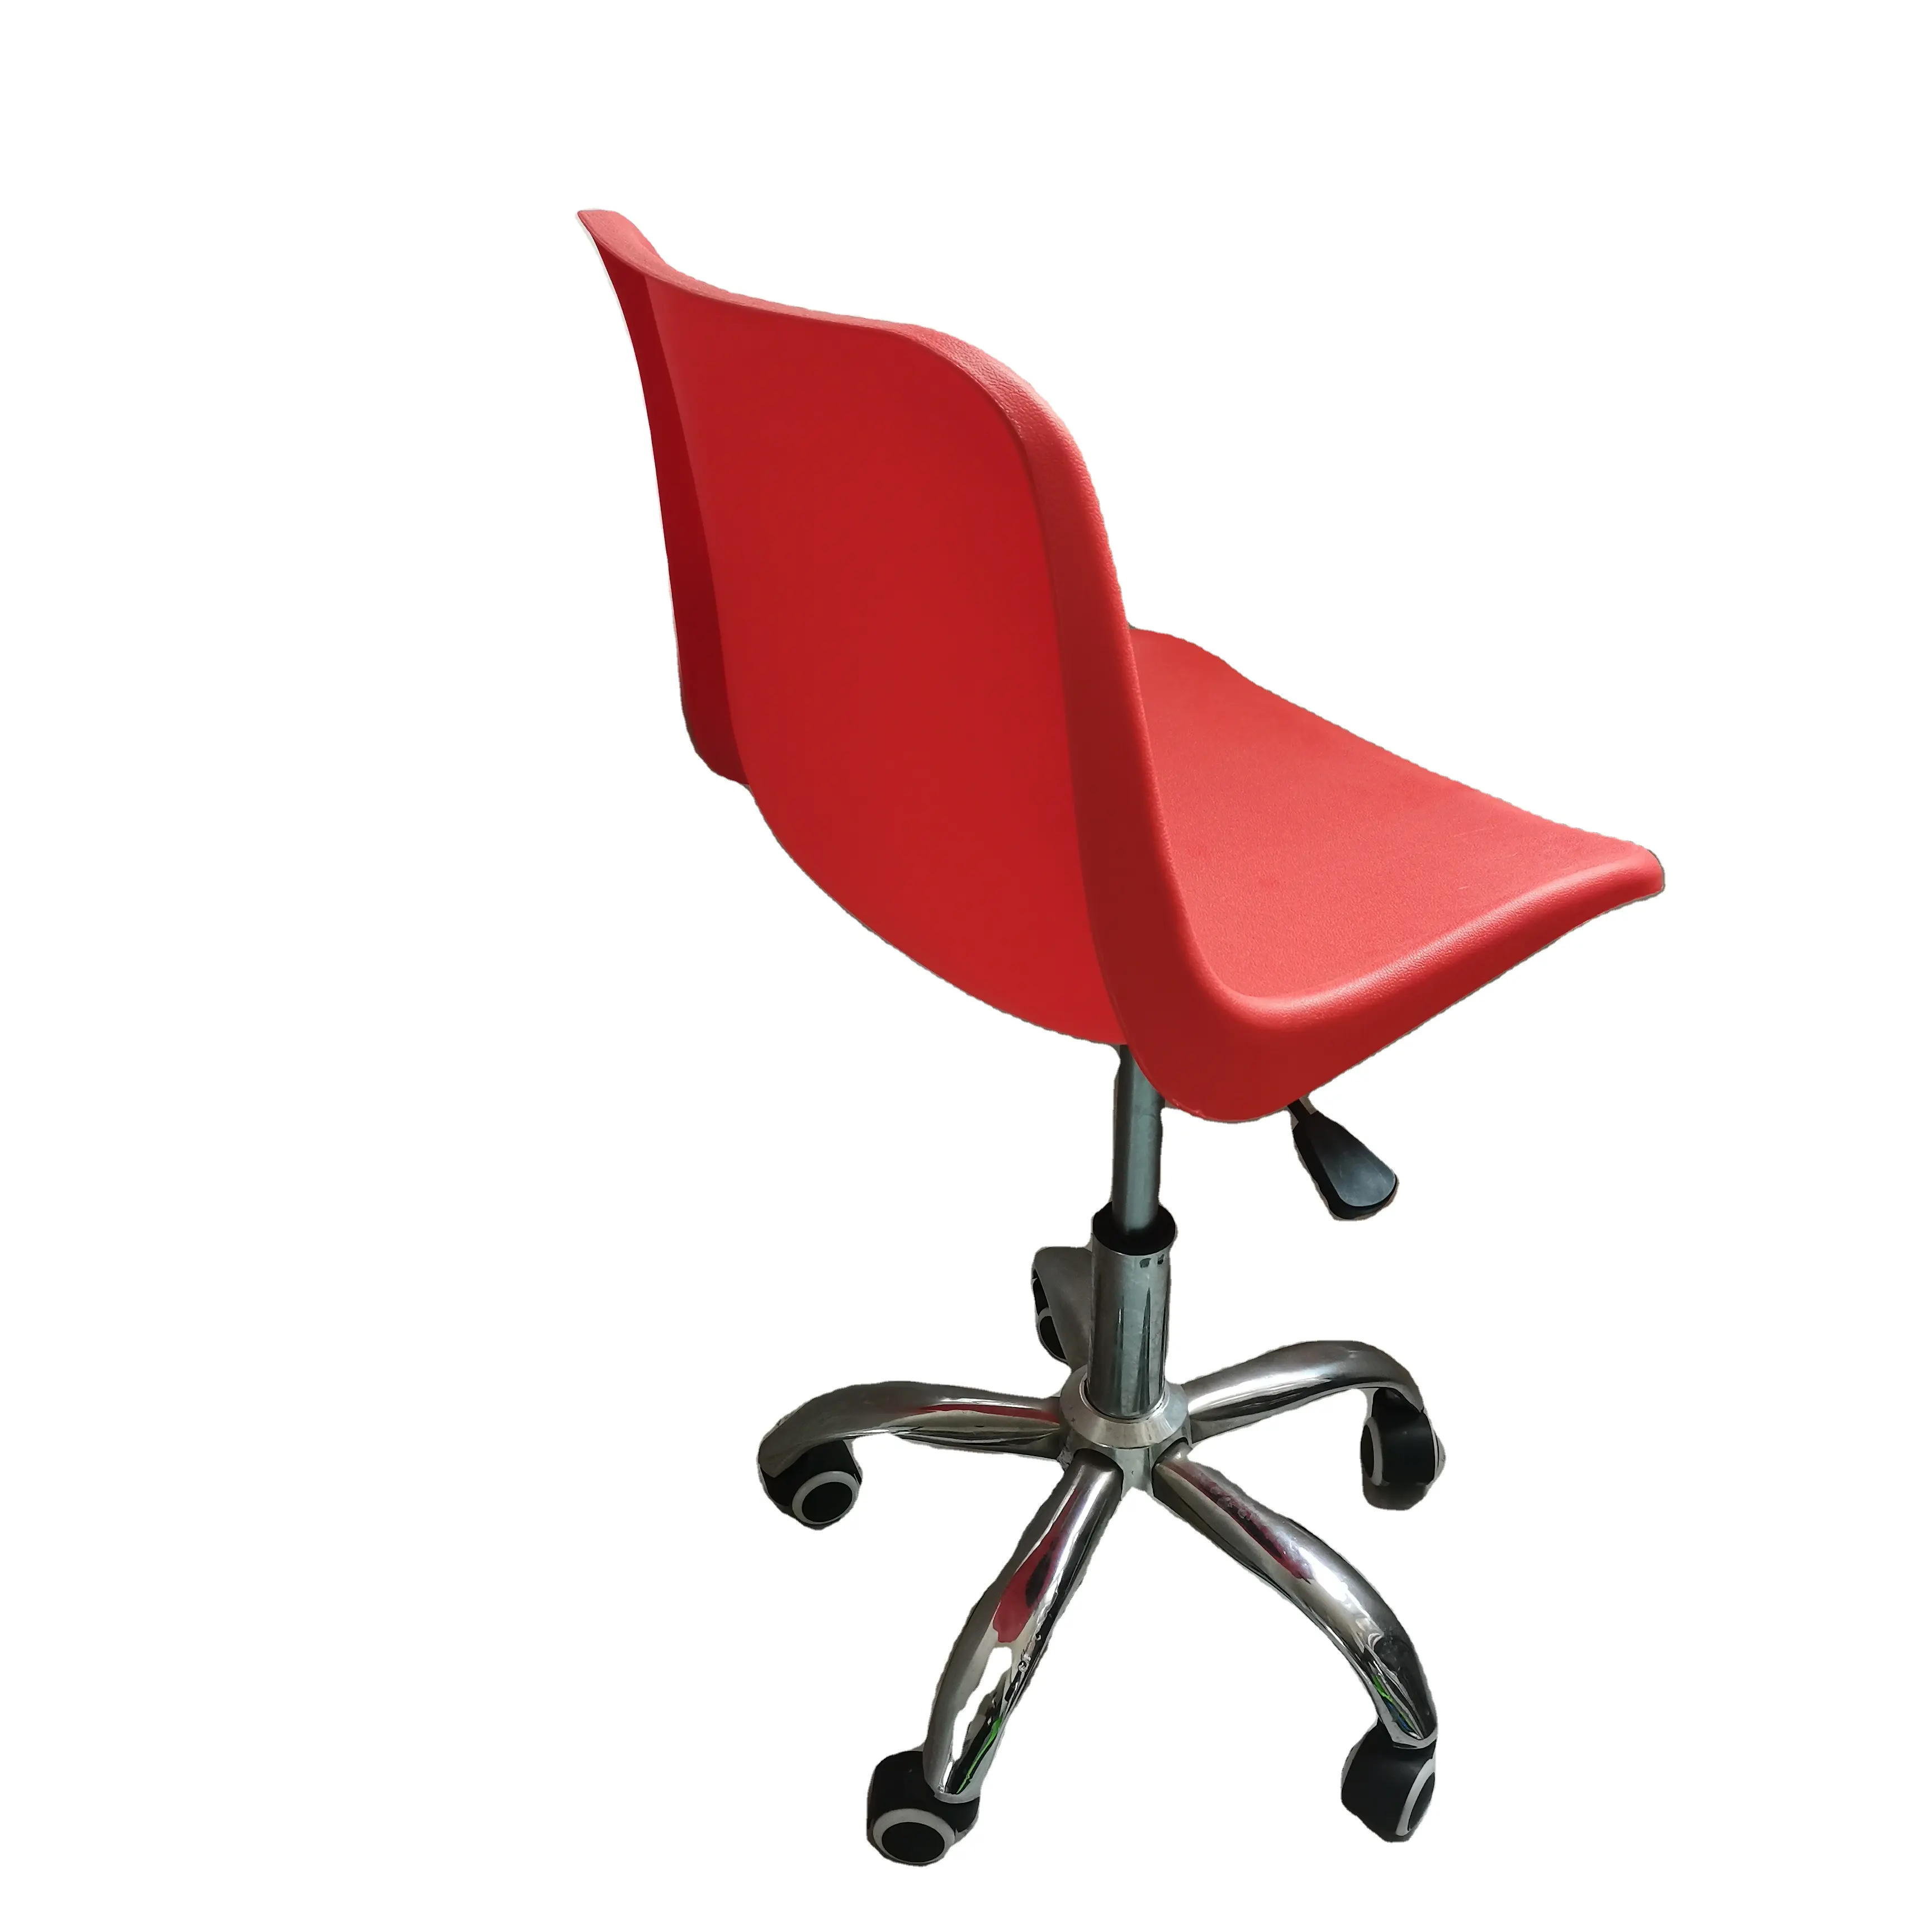 heavy duty high back client red color comfort seat egonomy cheap industrial office chairs silla